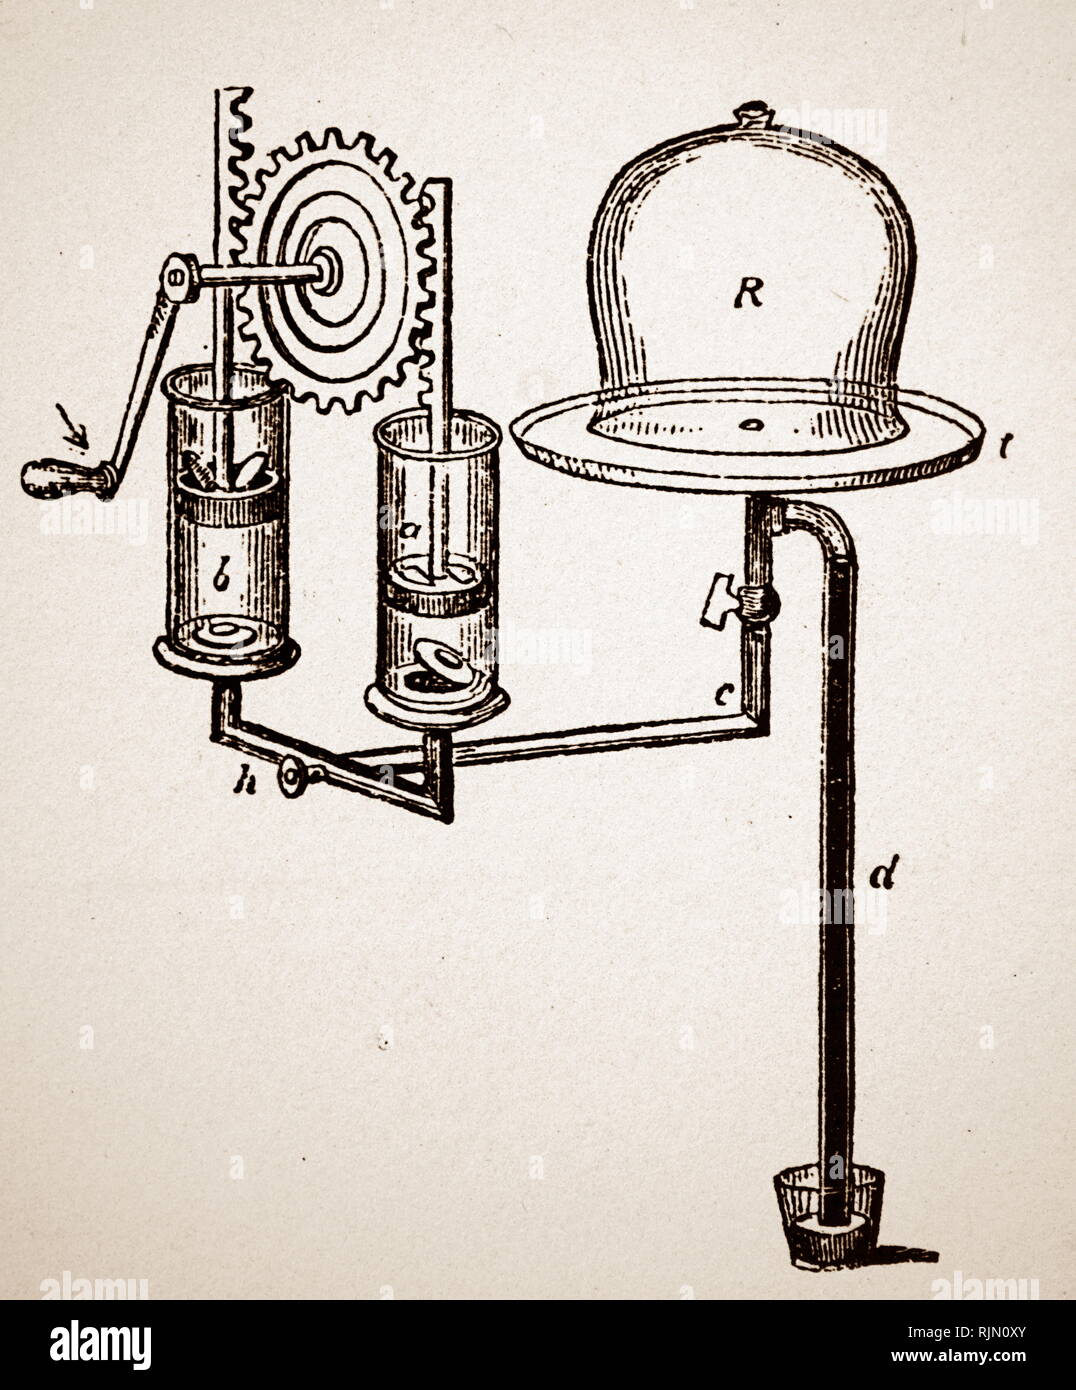 Illustration showing Air pump: the mechanism, showing the rack-and-pinion  system operating the double exhausting syringe 1866 Stock Photo - Alamy